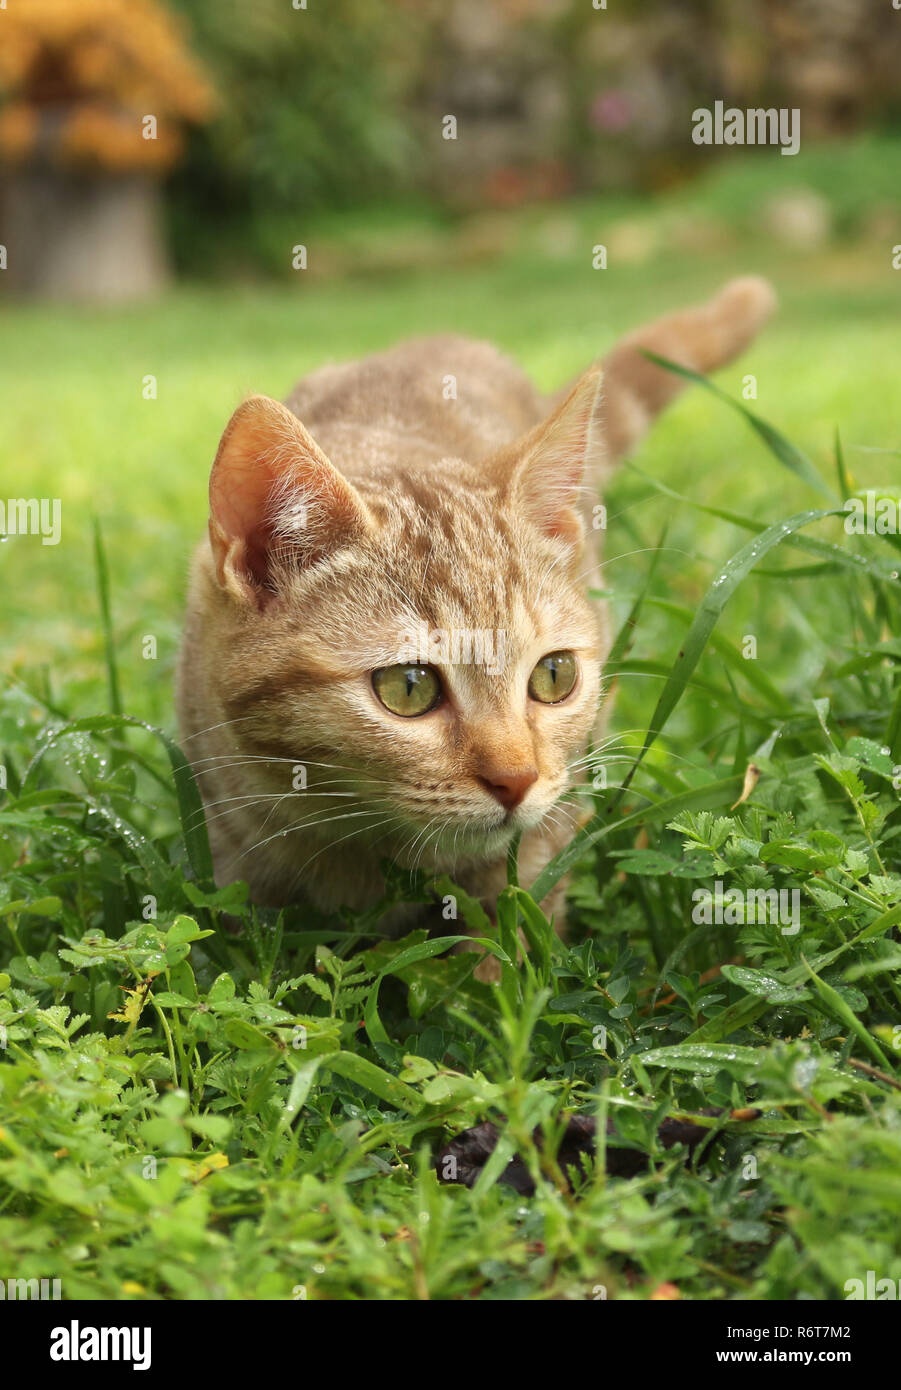 young ginger cat, 3 month old, Stock Photo